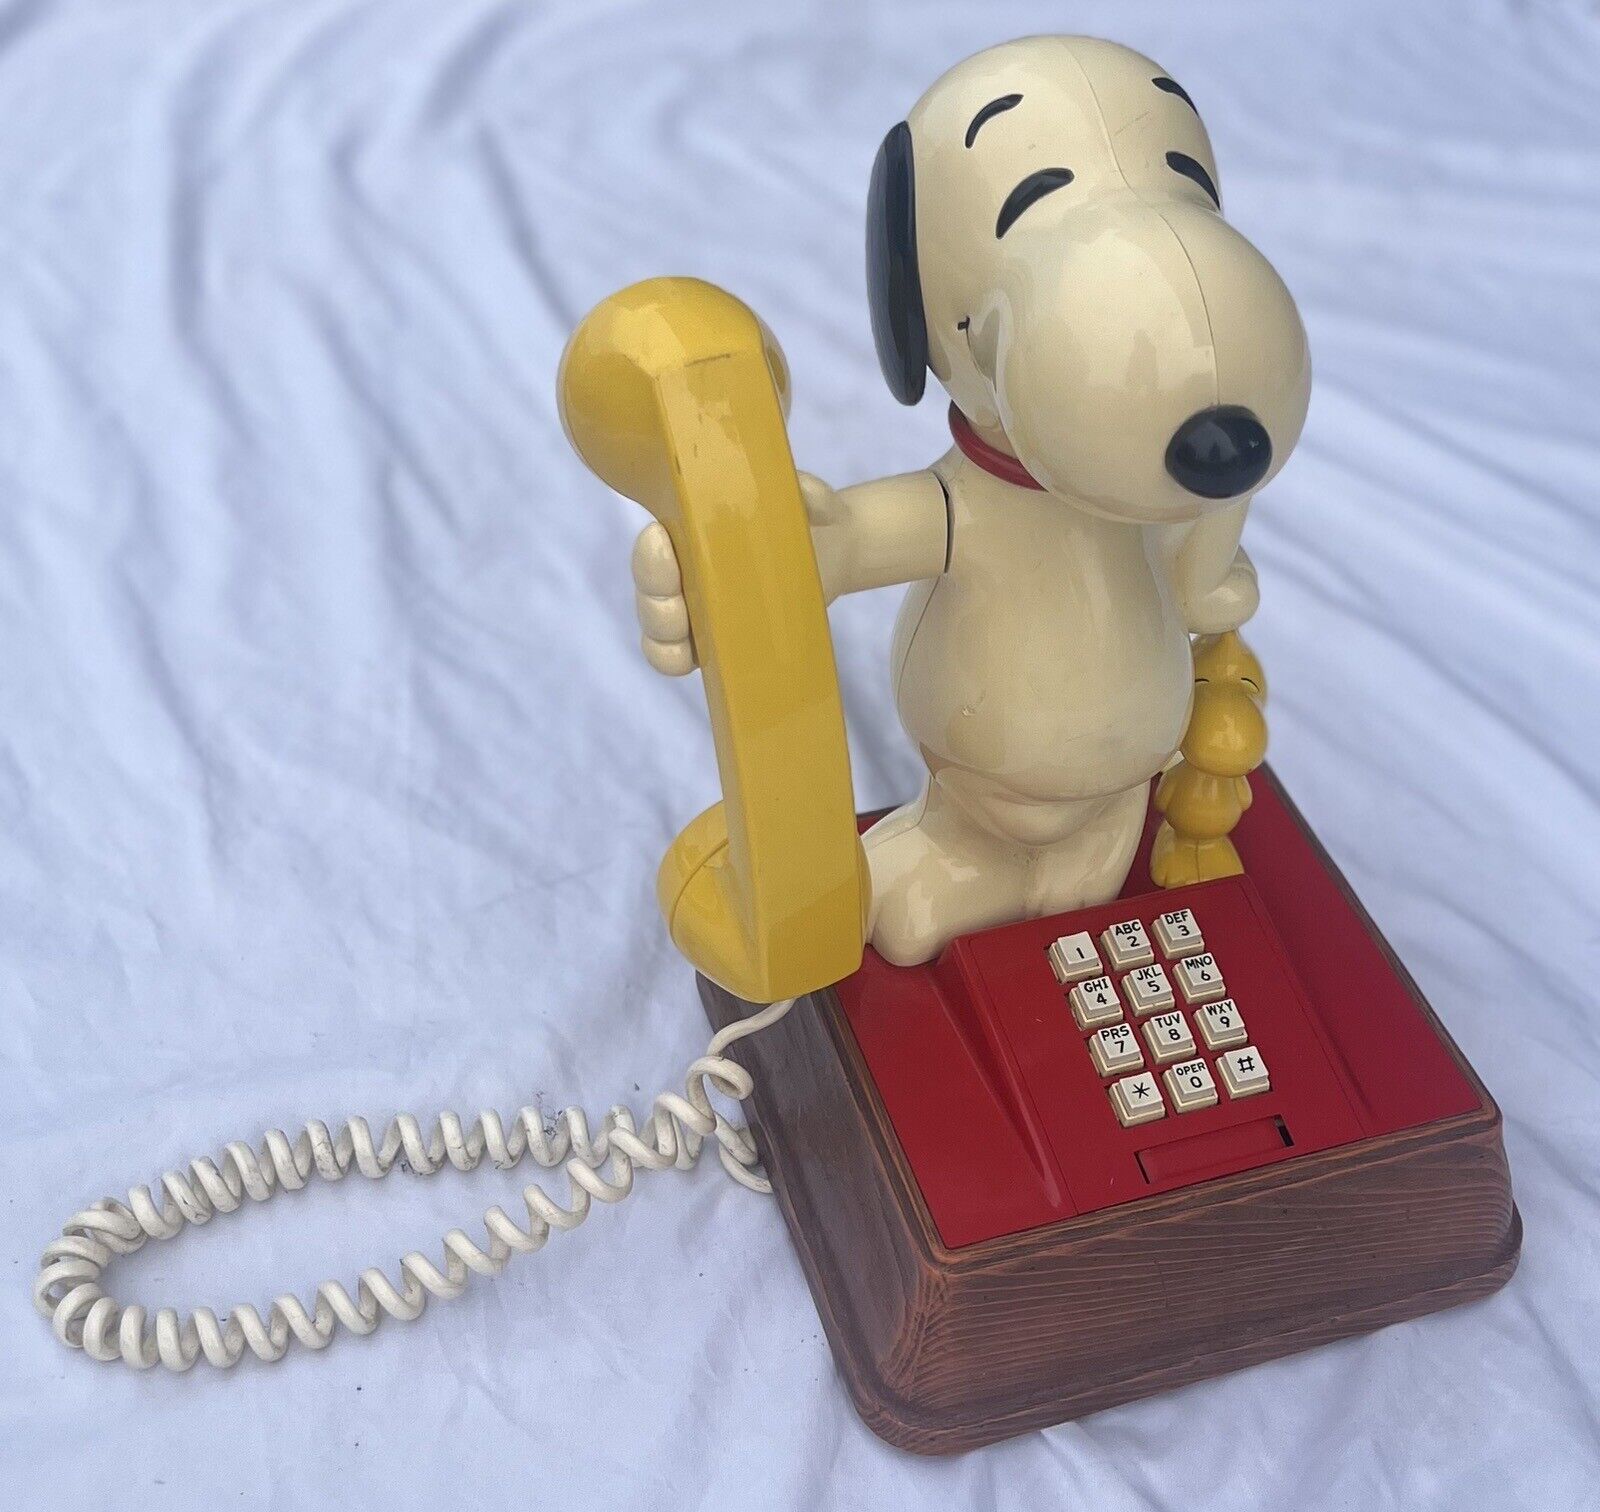 VINTAGE SNOOPY and WOODSTOCK PHONE MODEL #UBM8010 1976 PUSH BUTTON TELEPHONE